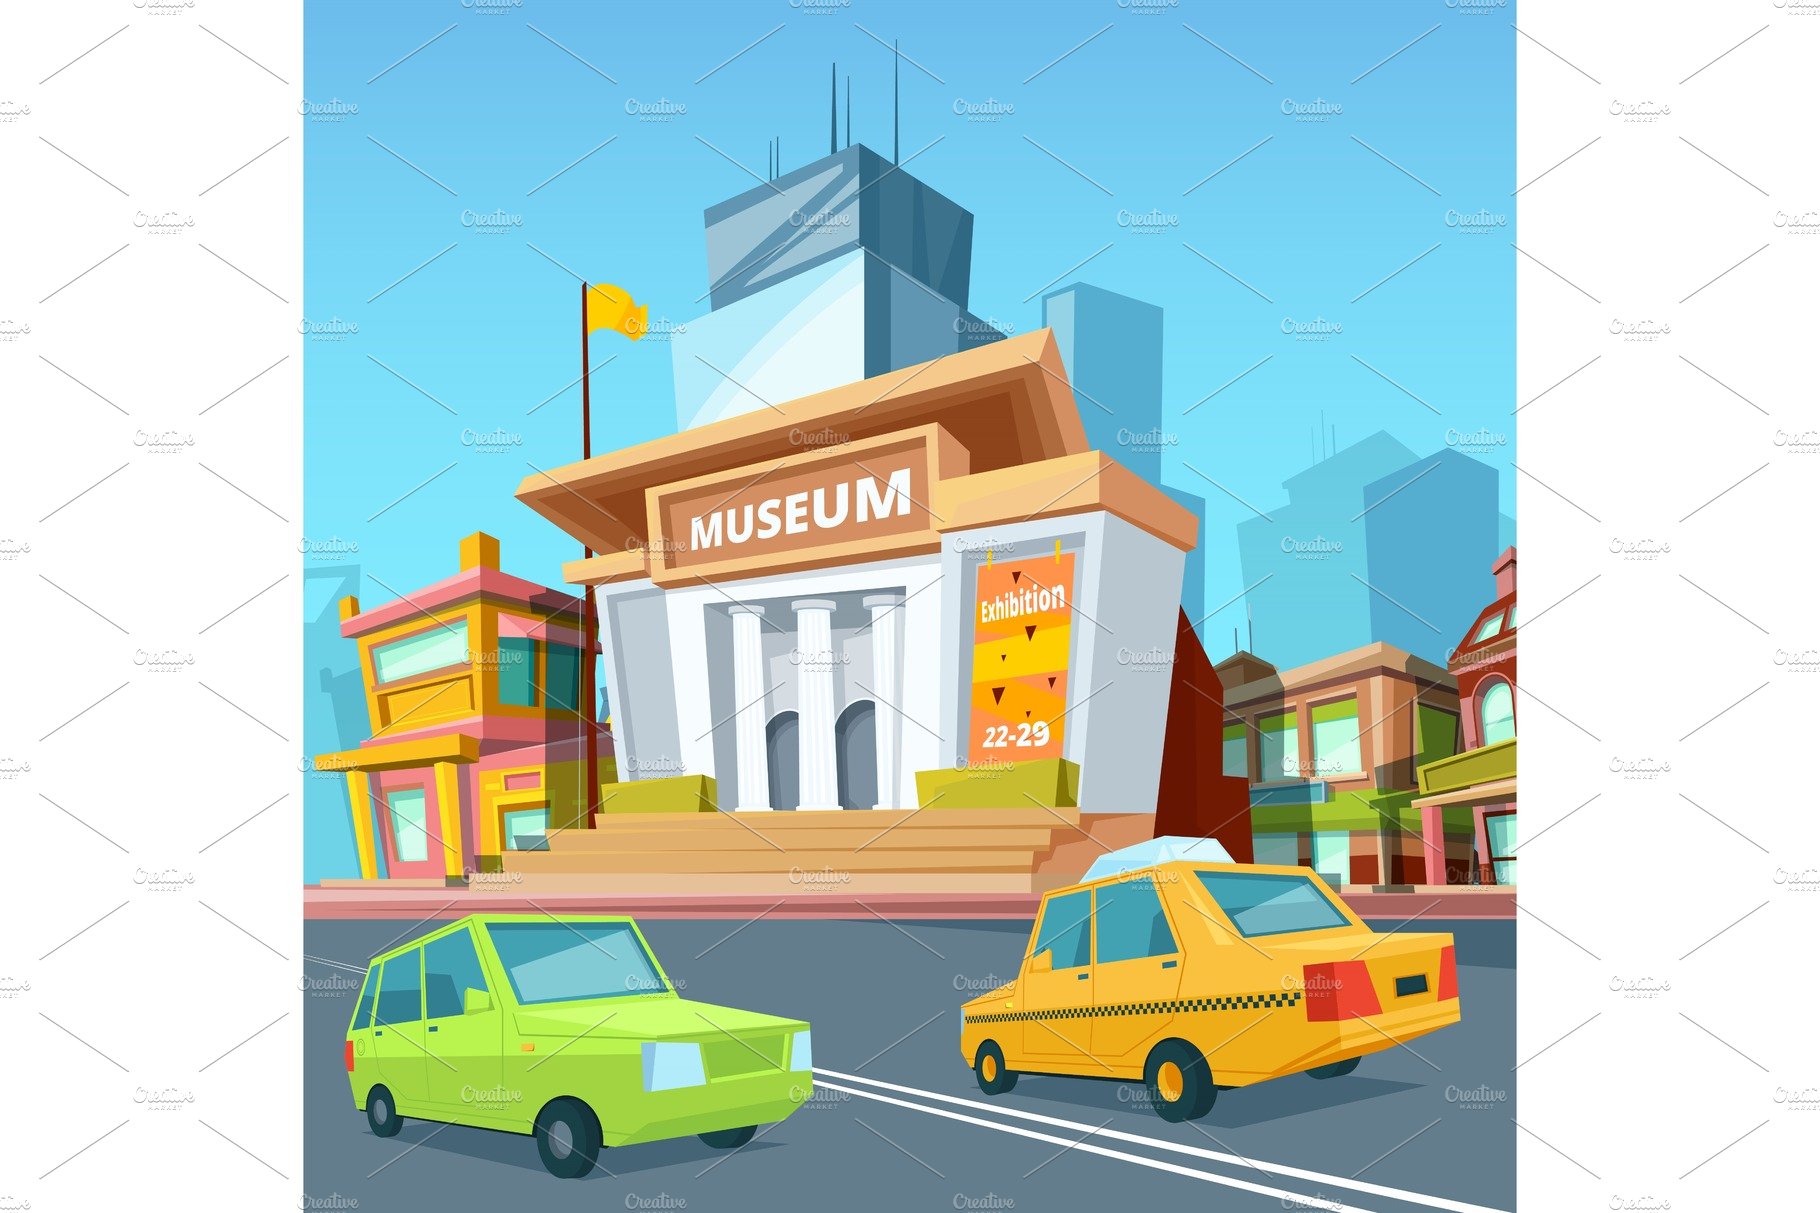 Urban landscape with various buildings and facade of historical museum cover image.